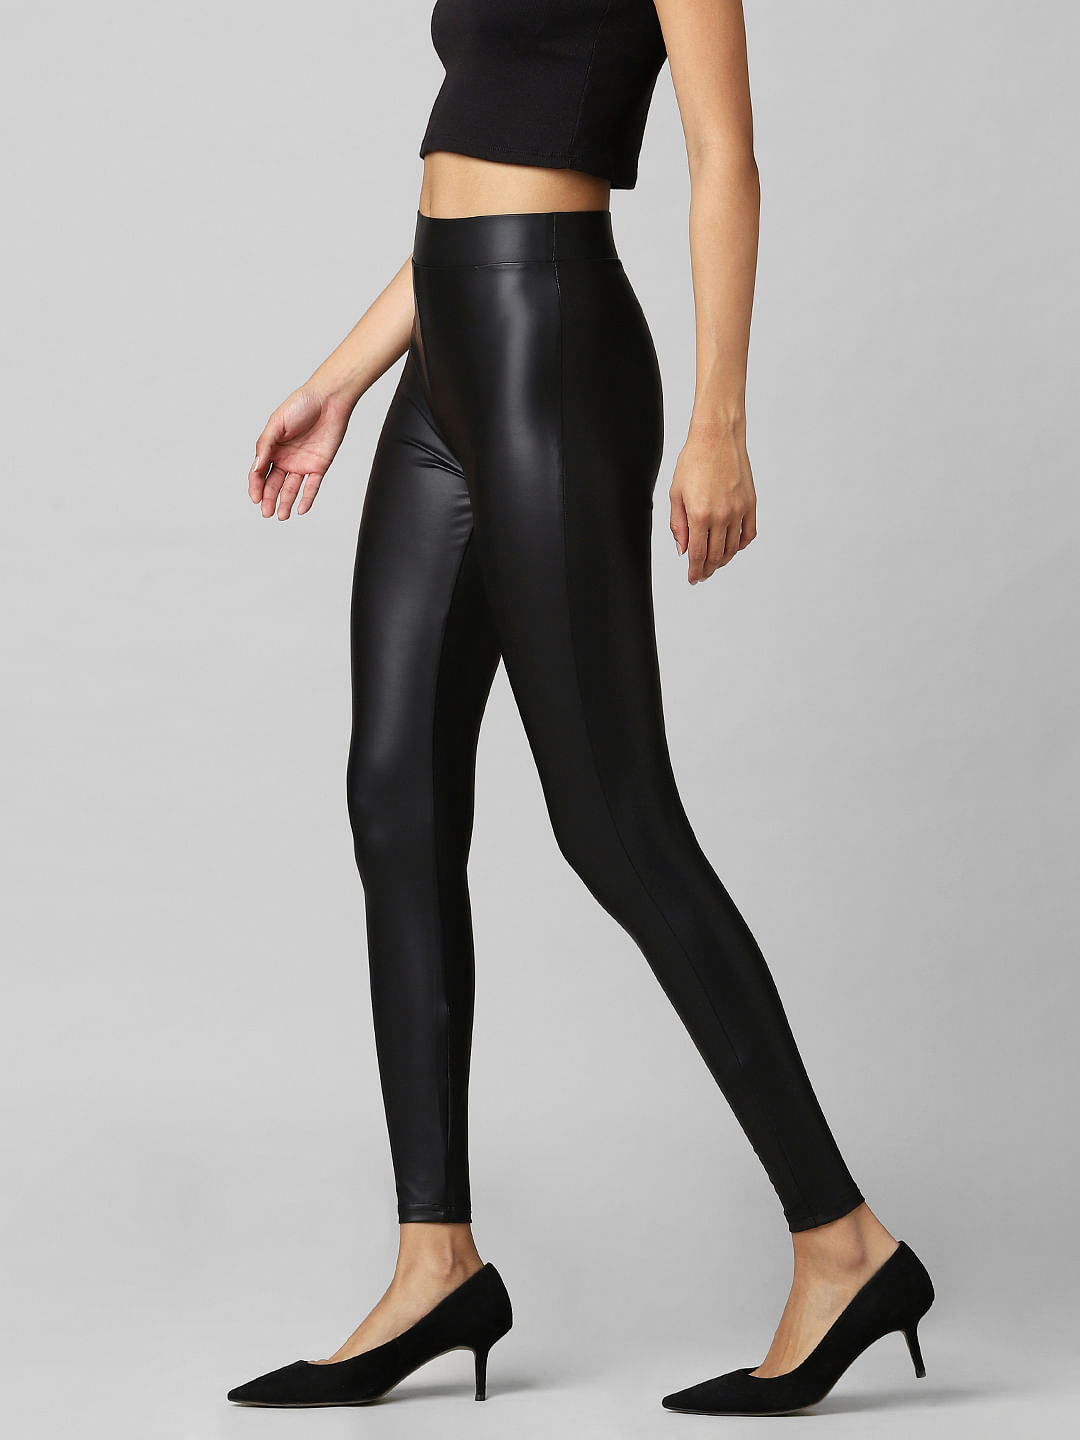 Shine All Day Faux Leather Leggings